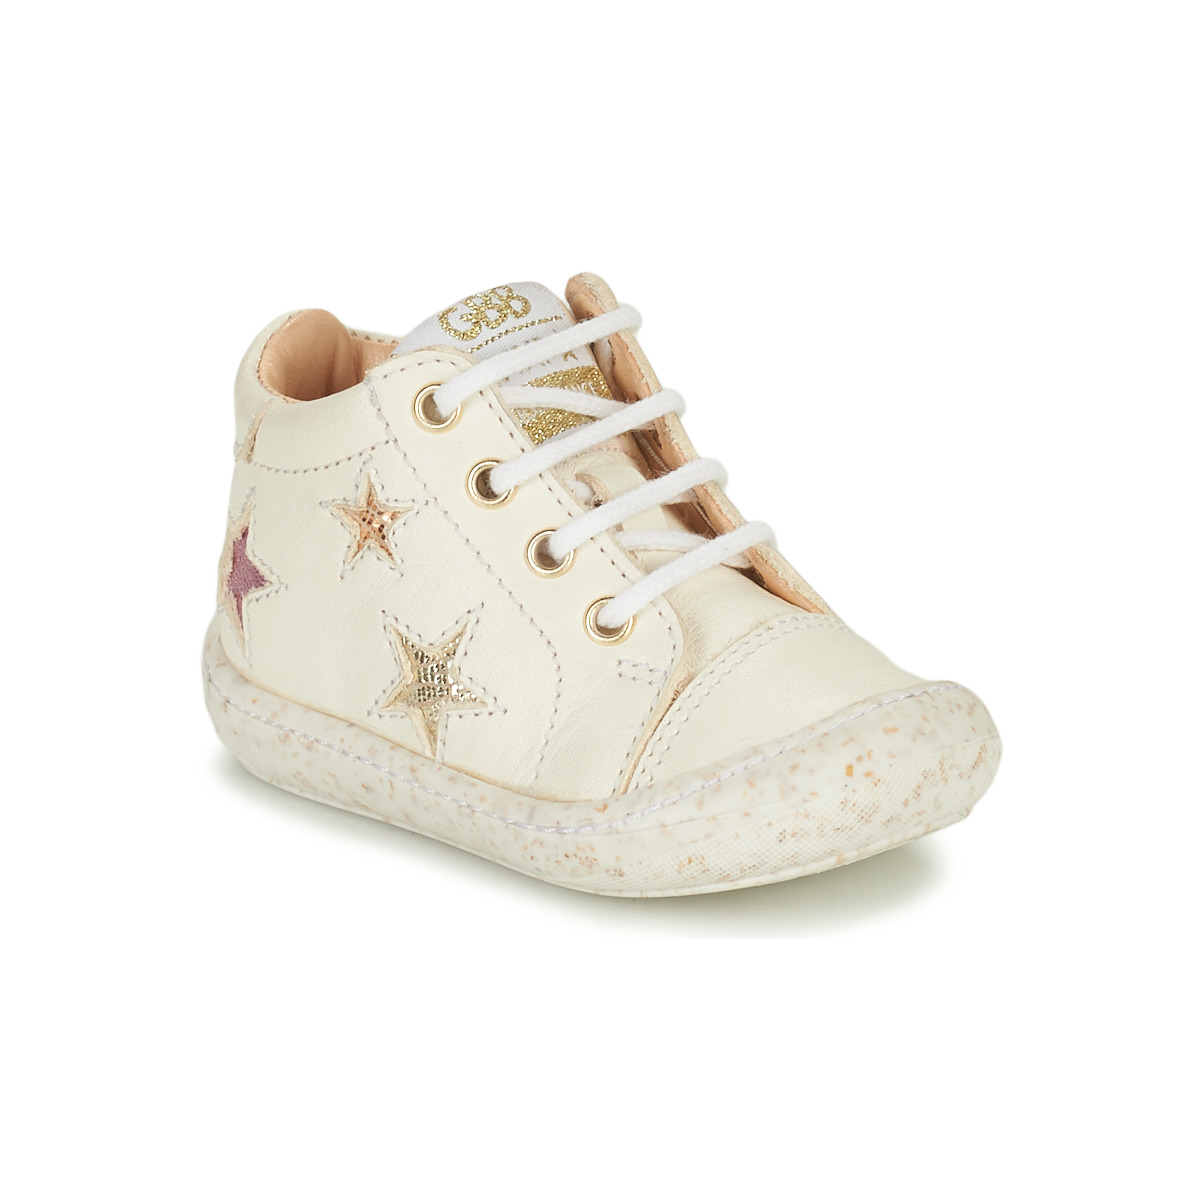 Chaussures Fille Senses & Shoes BECKIE Blanc